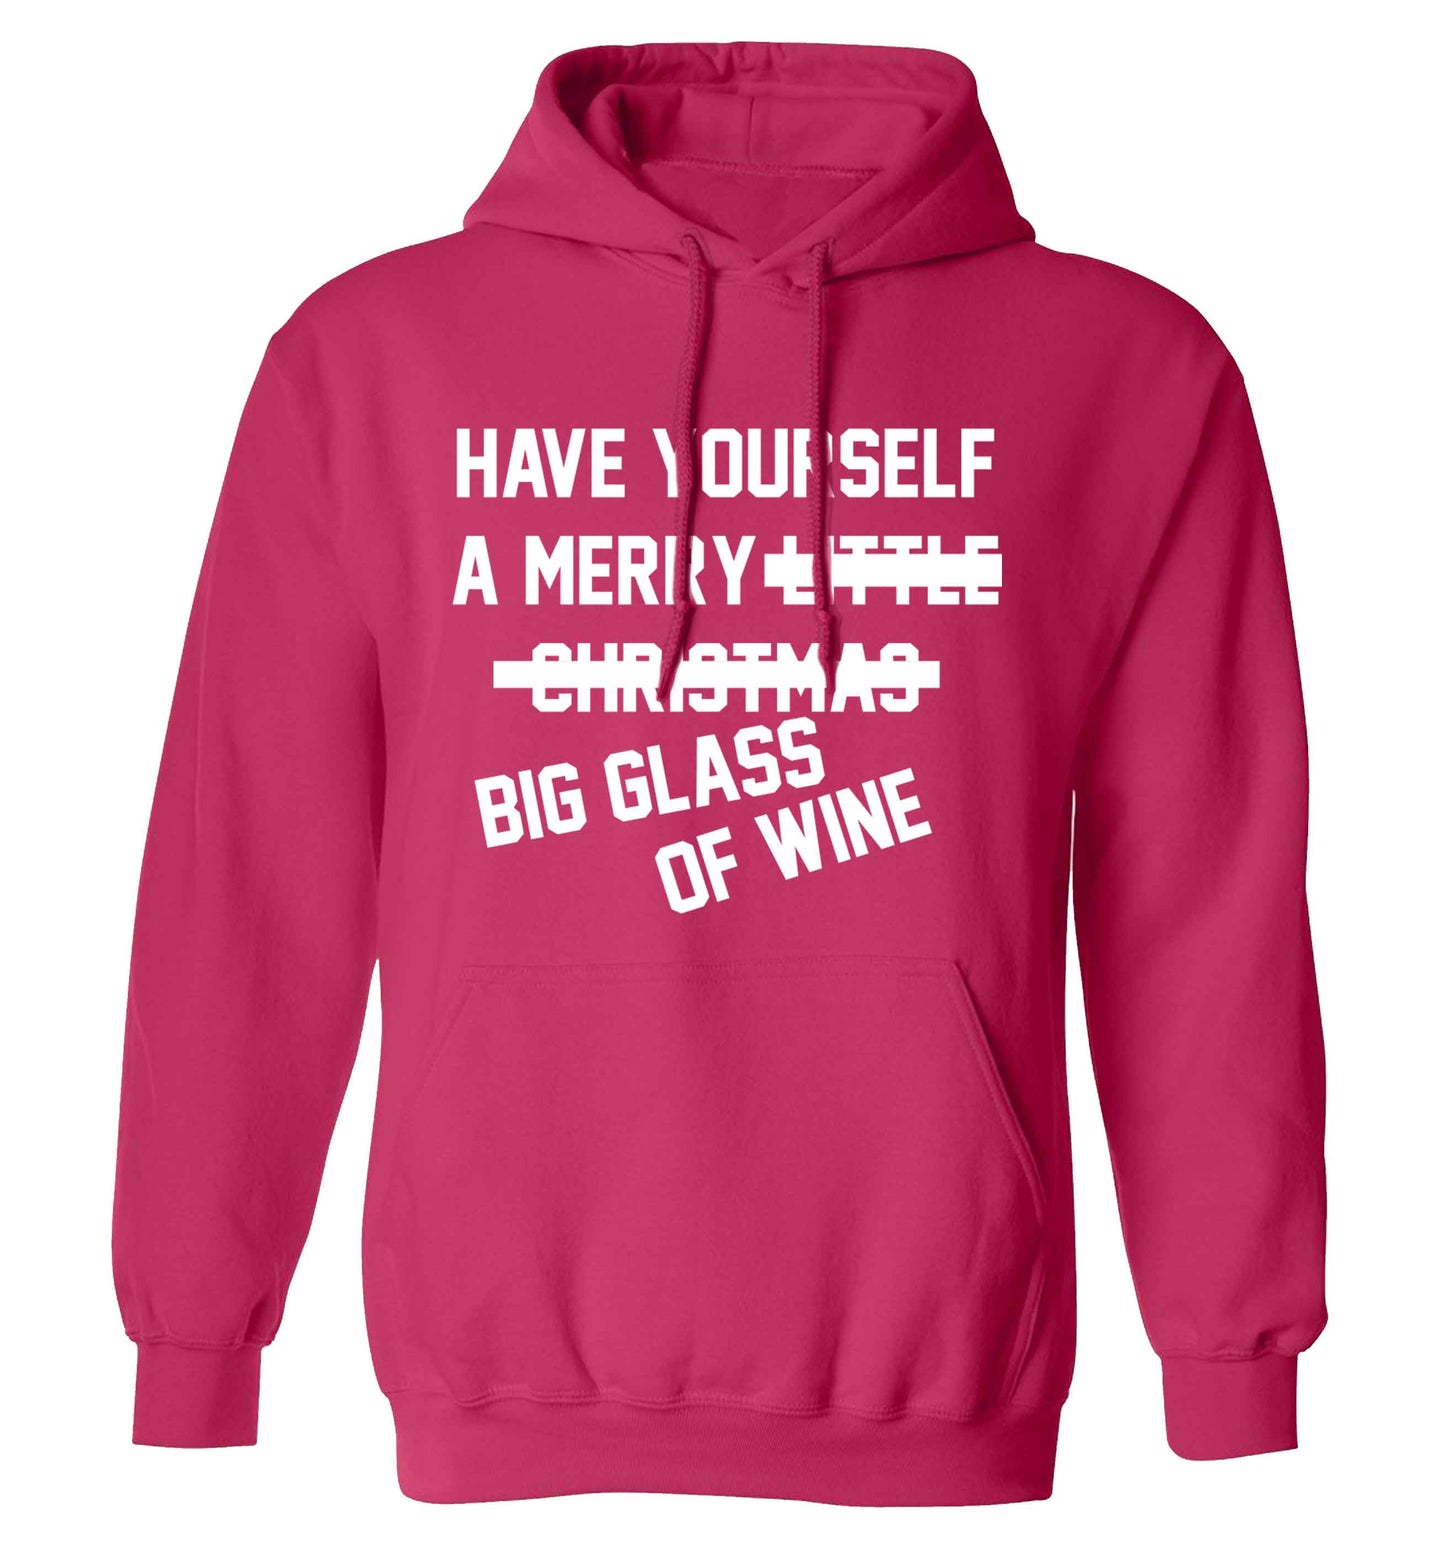 Have yourself a merry big glass of wine adults unisex pink hoodie 2XL